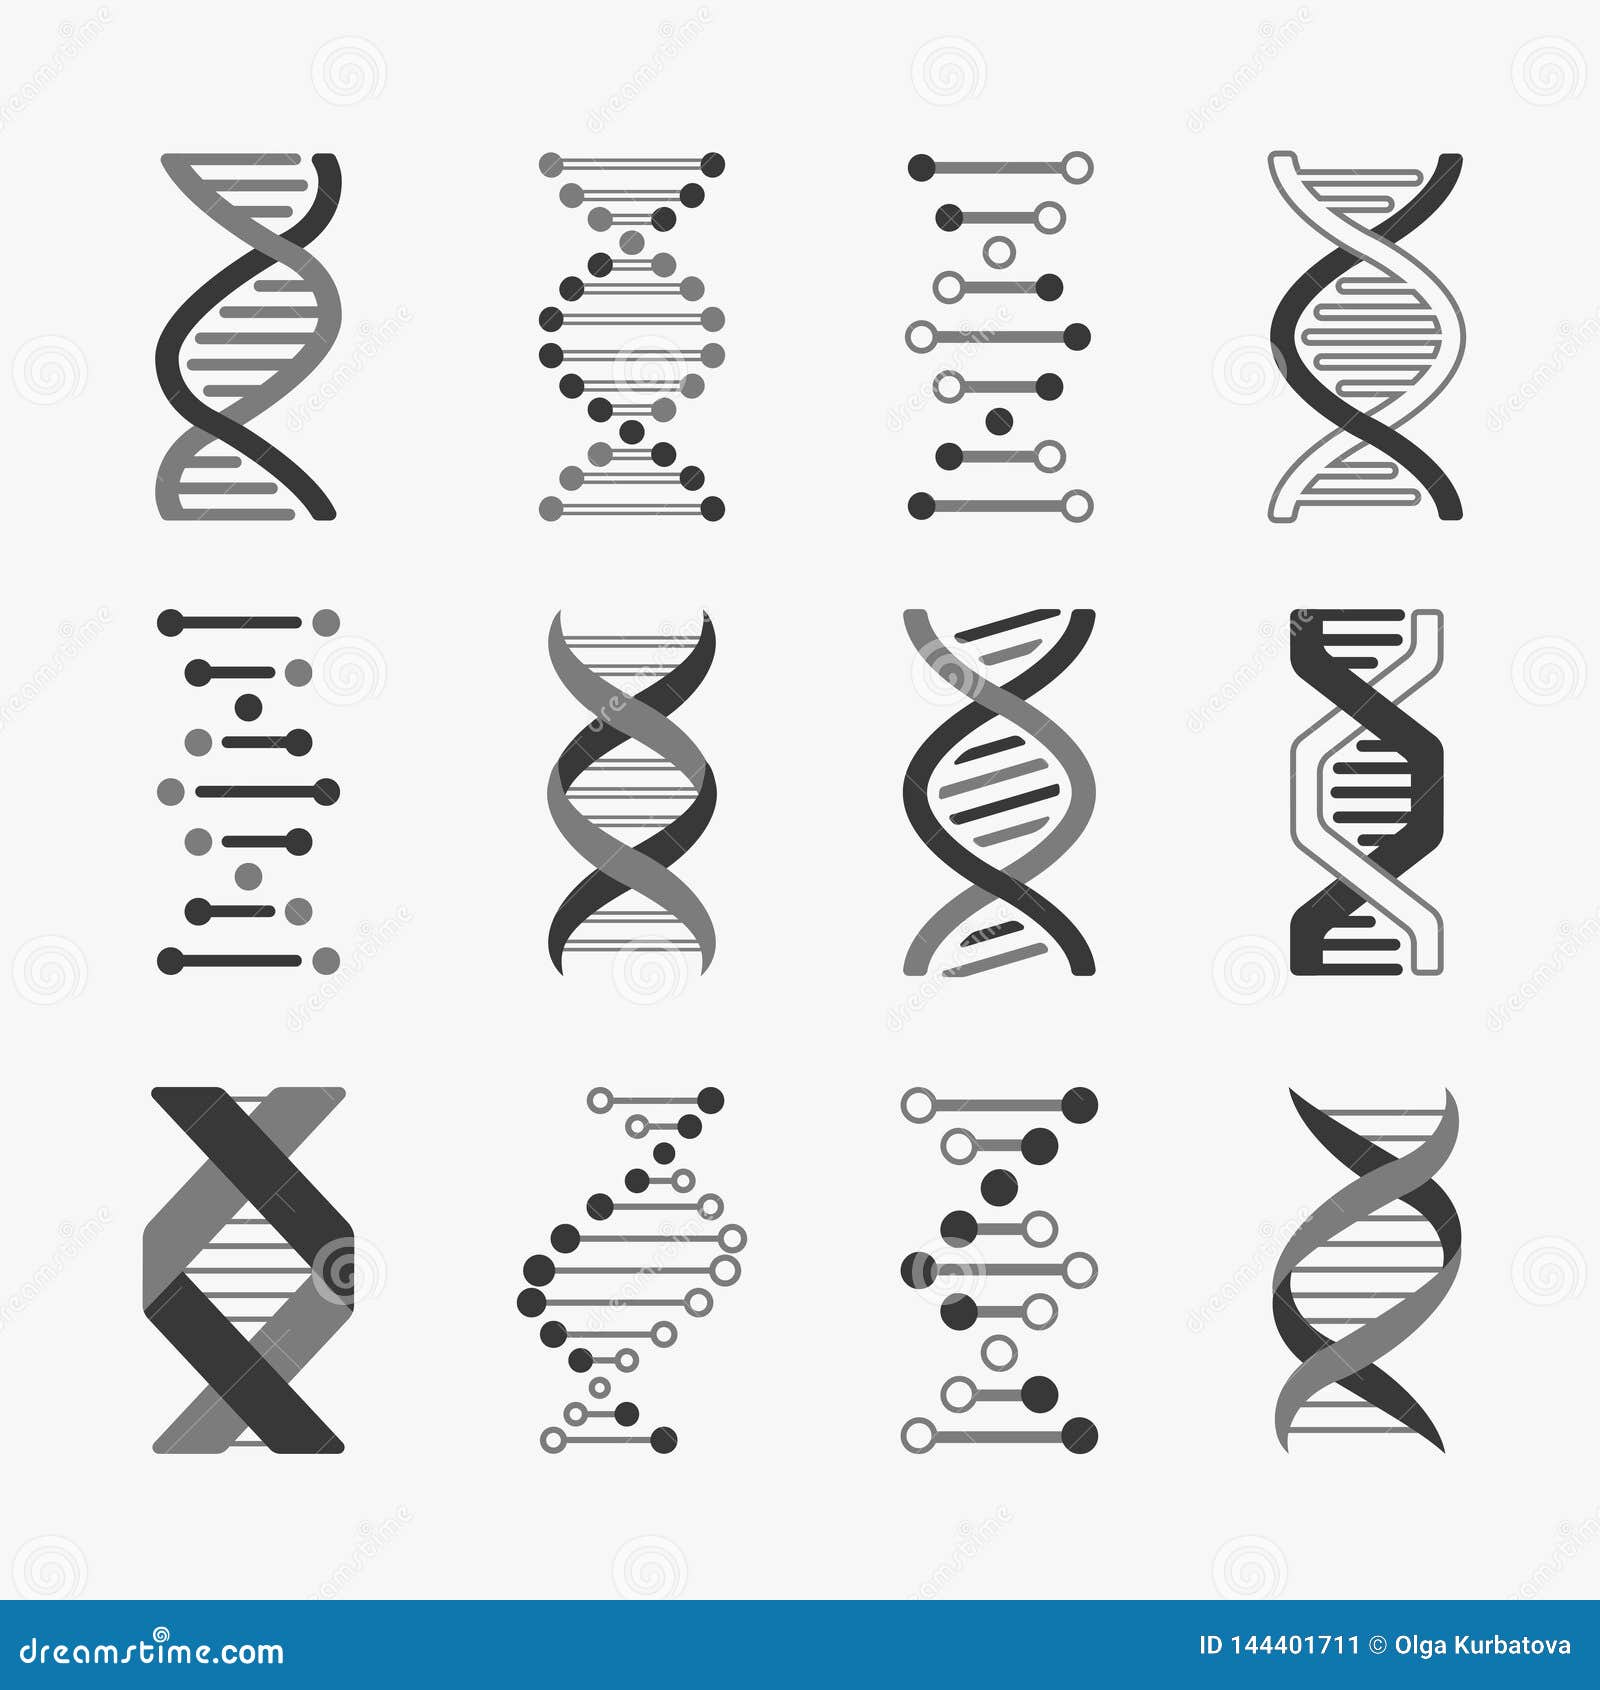 dna. helix cell gene structure bioinformatics spiral chromosomes research biology genetic engineering,  technology